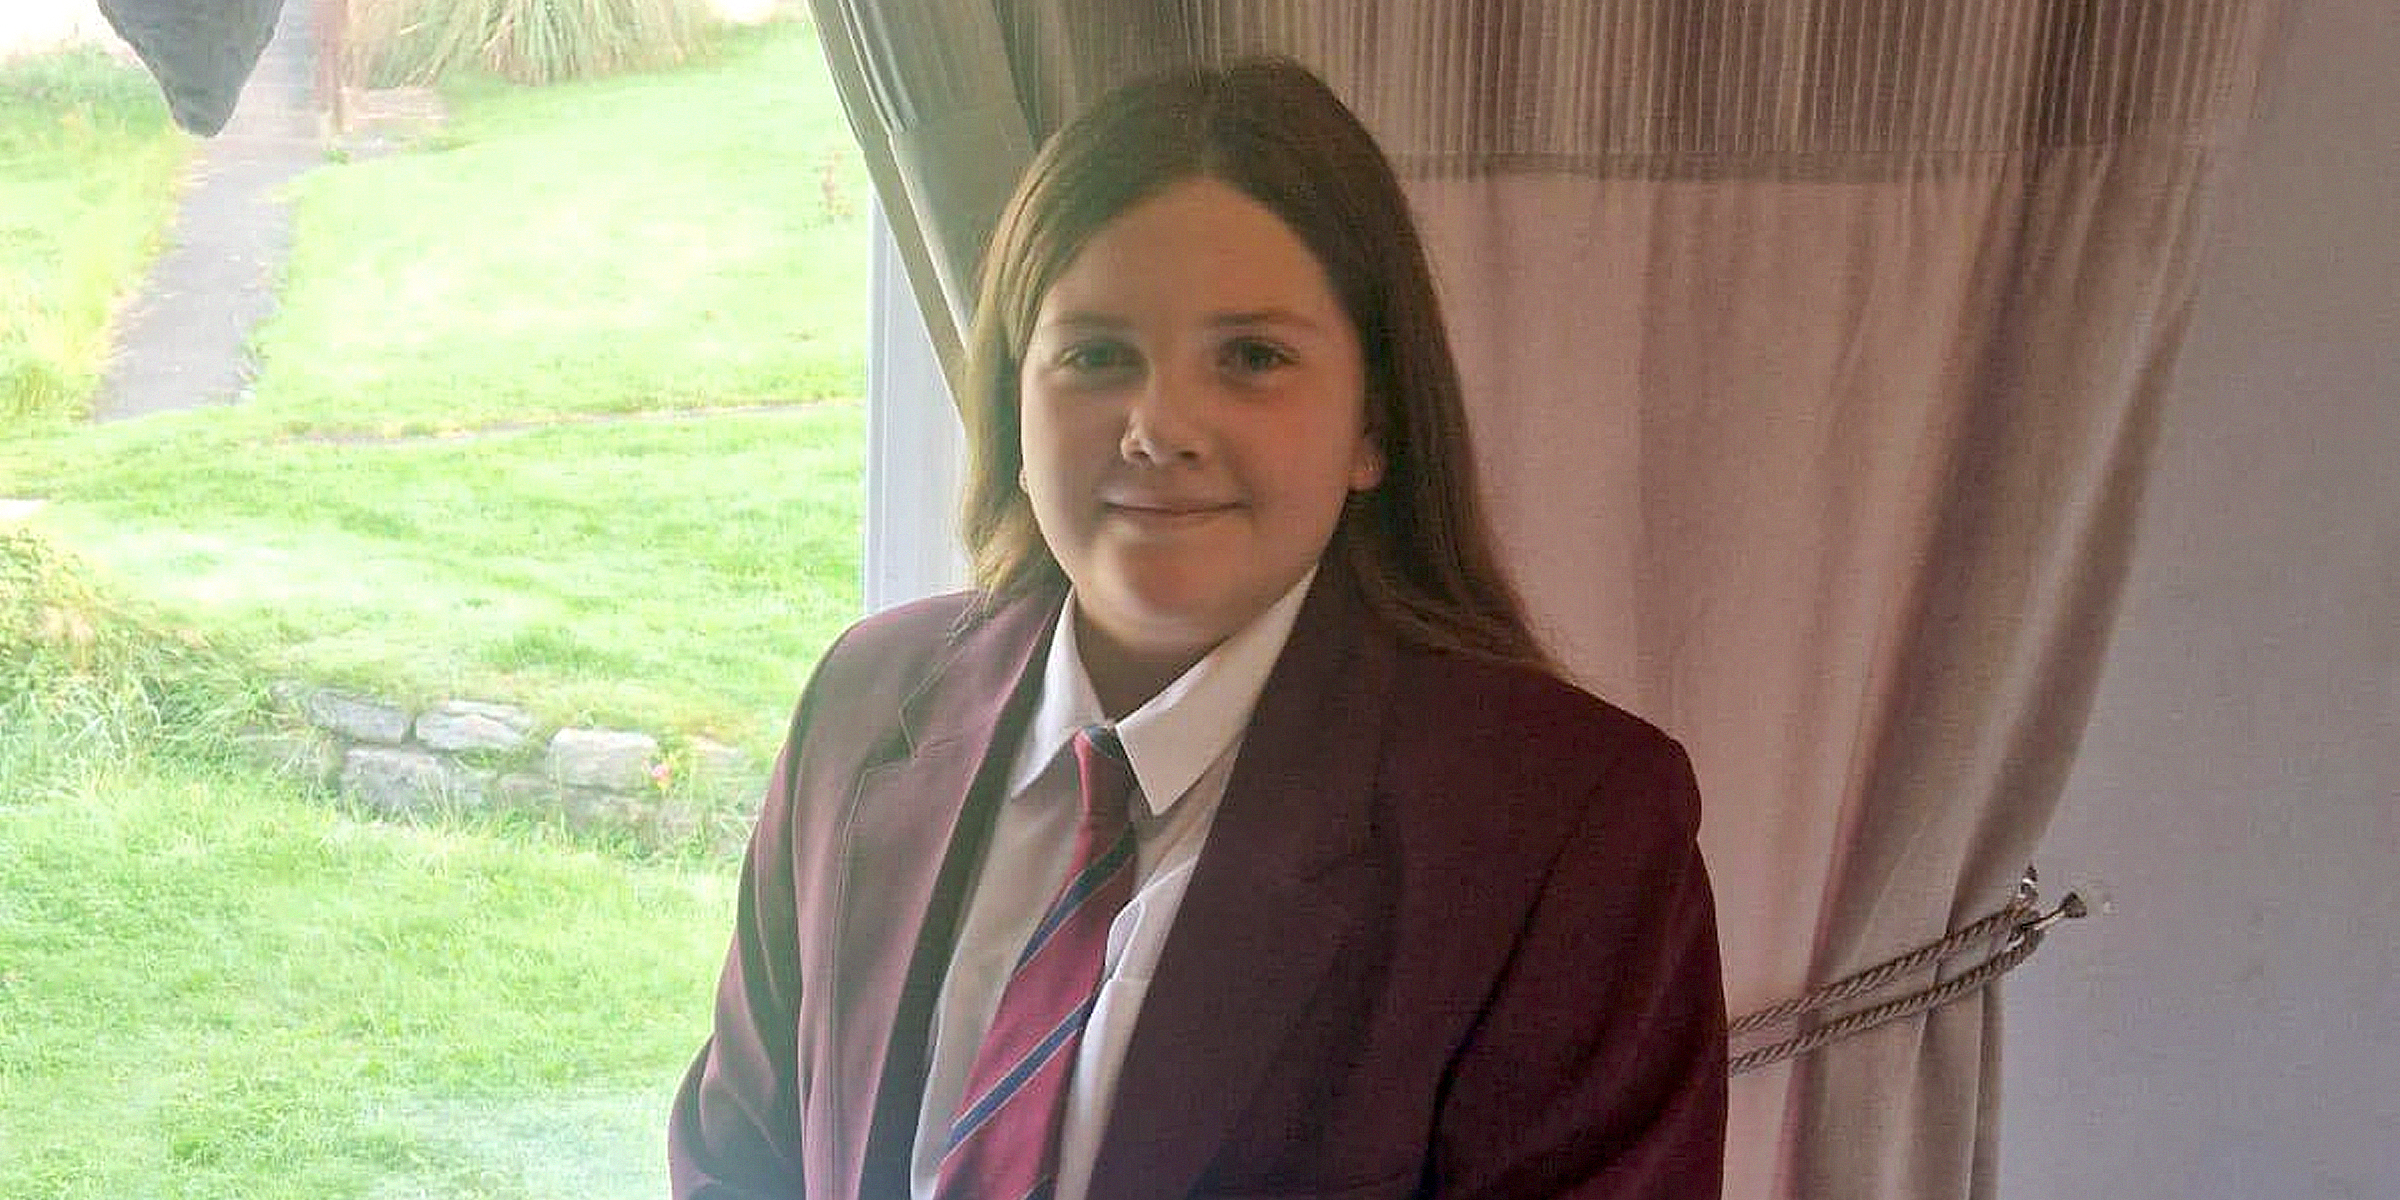 Nevie of Colne Valley High School | Source: facebook.com/yorkshirelive